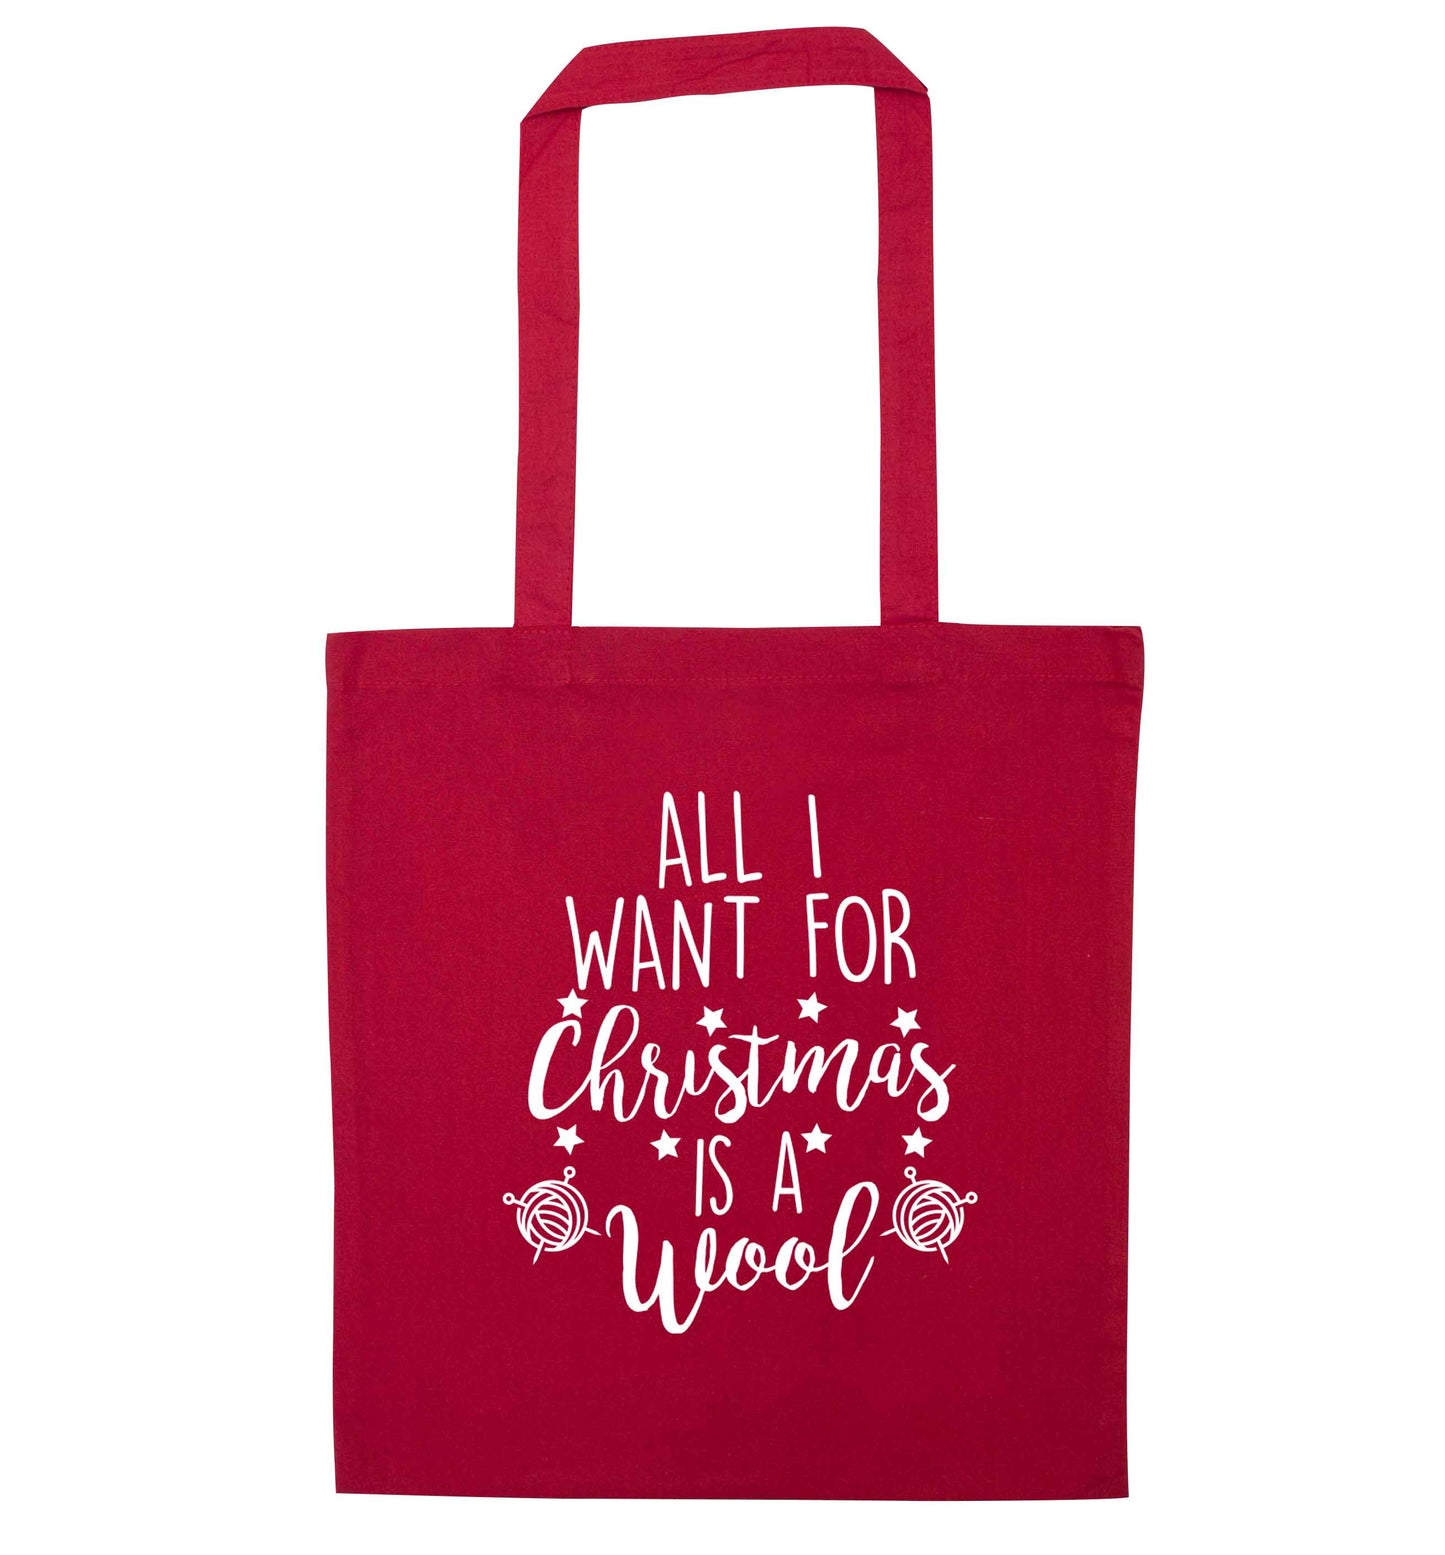 All I want for Christmas is wool! red tote bag